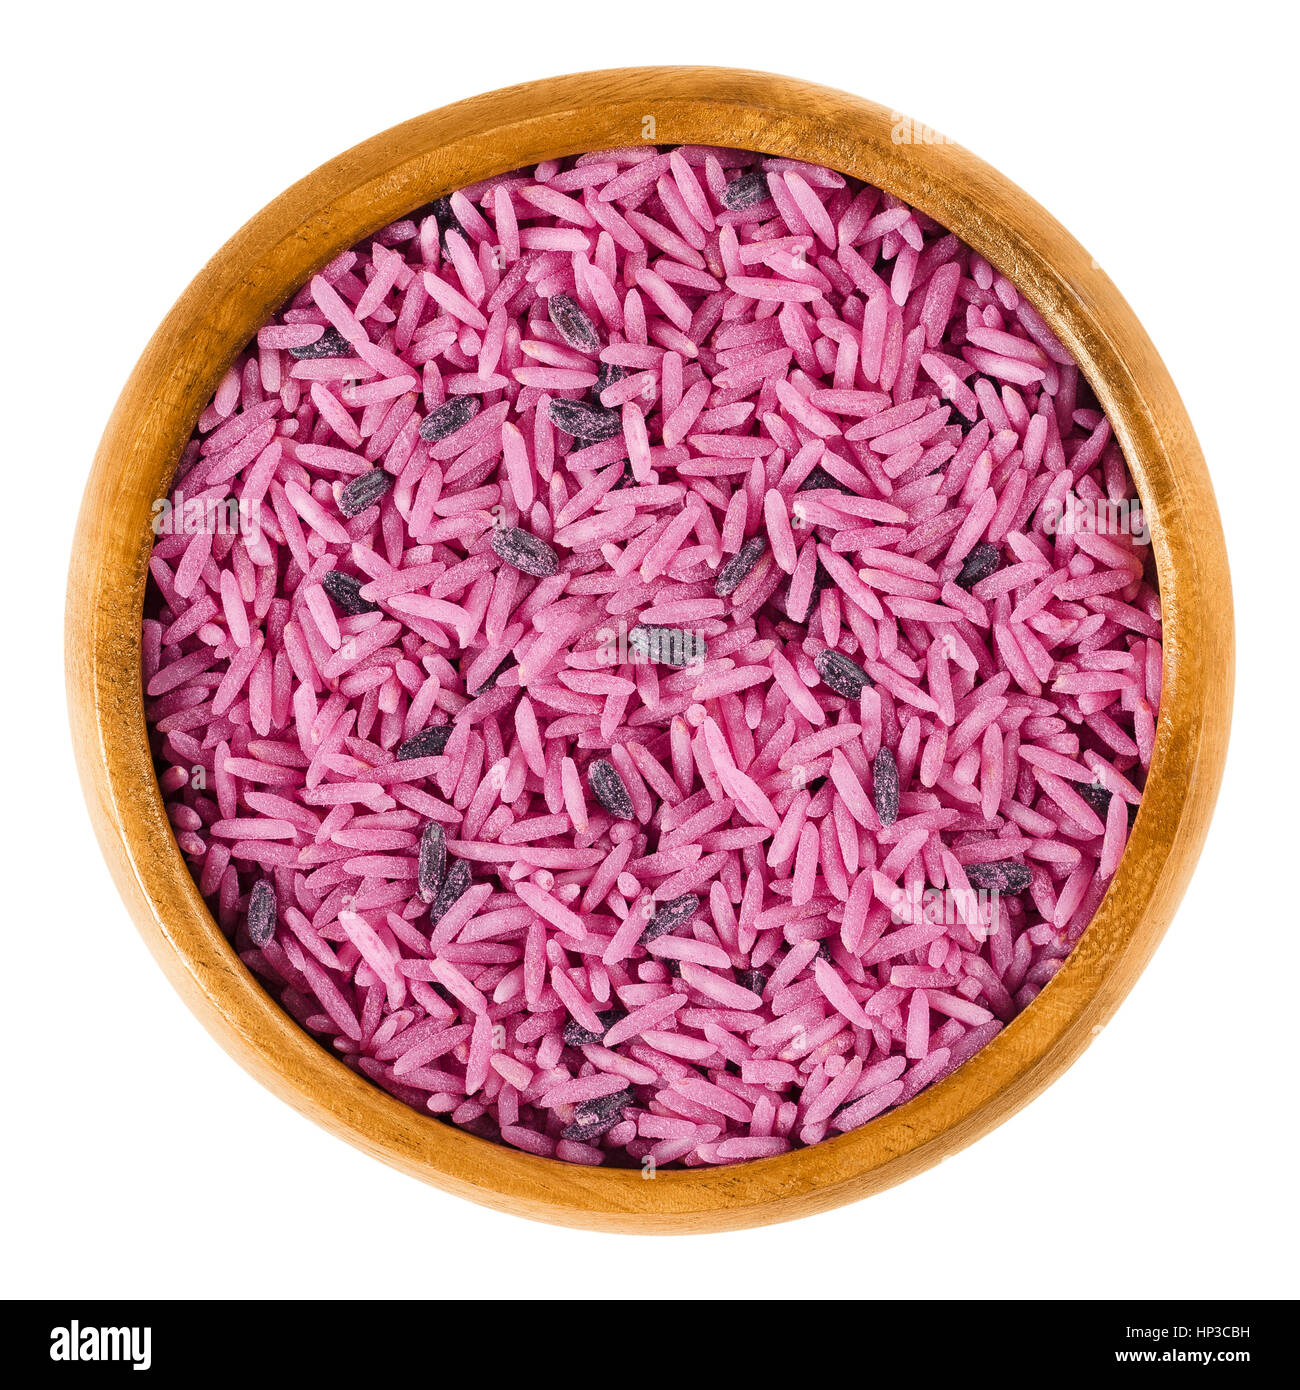 Glam Wedding Pink in a wooden bowl. Pink rice of lovers. Basmati and black rice colored with red beets, symbolizing crazy Bollywood weddings. Stock Photo